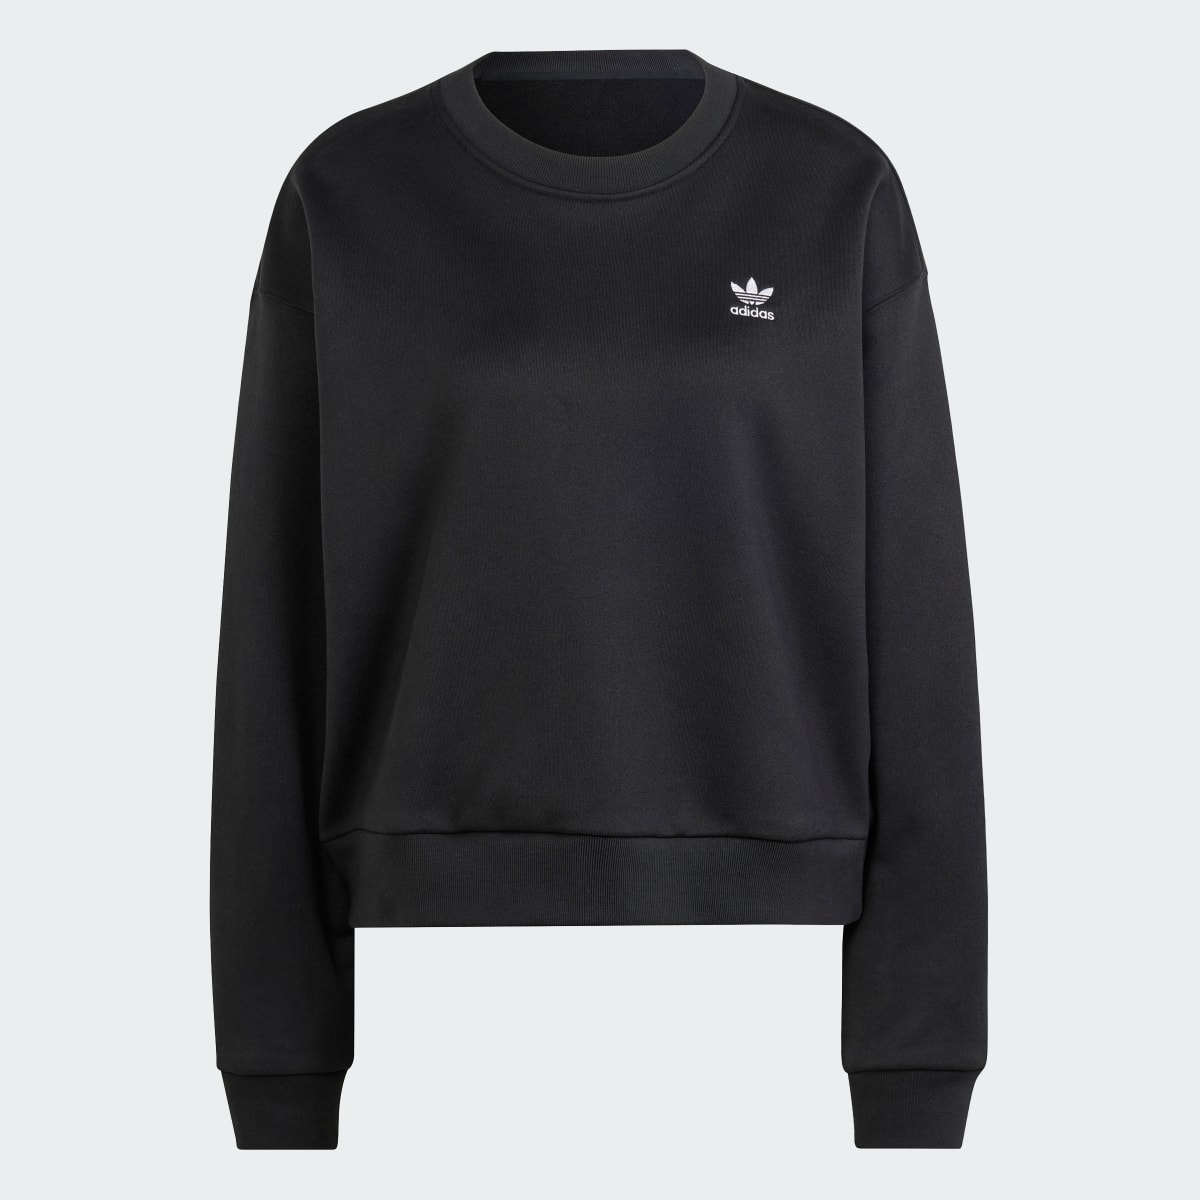 Adidas Trefoil Cropped Sweater. 5